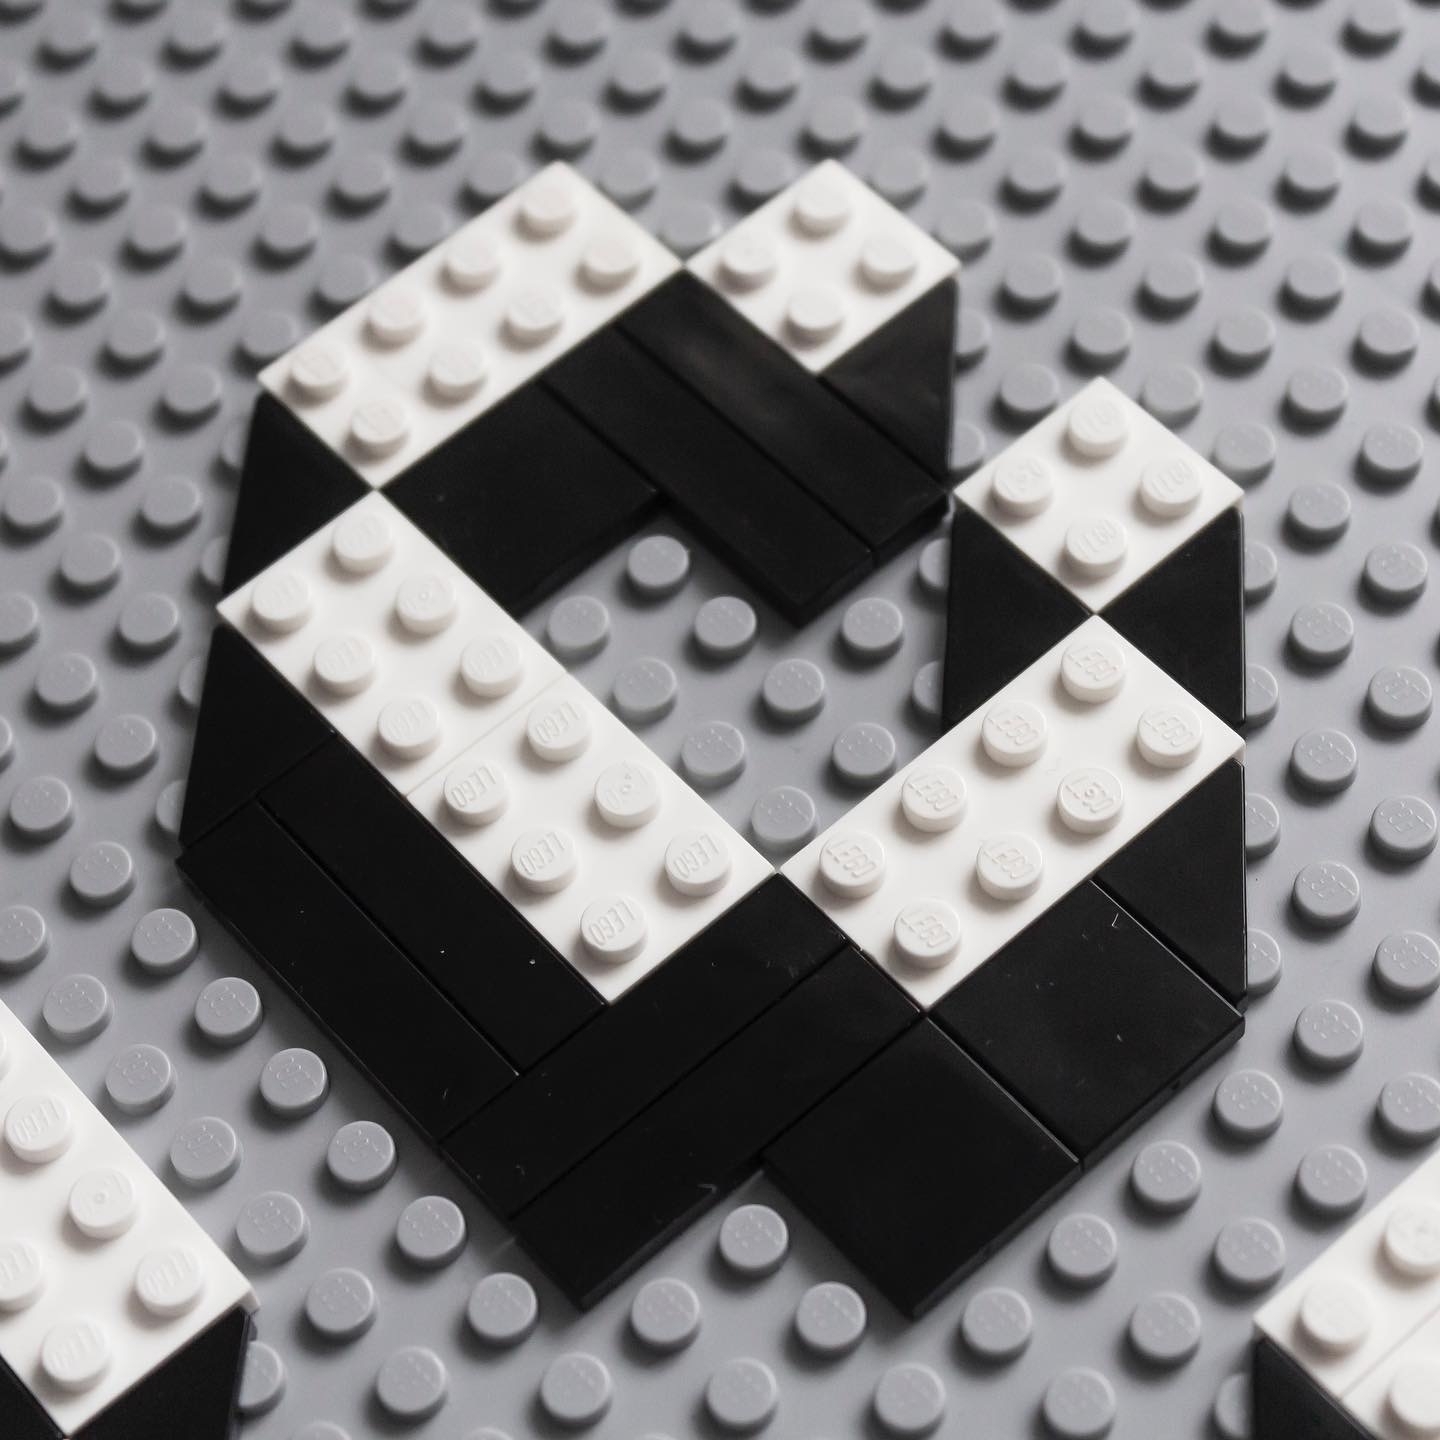 White letter C on a grey background, drawn with Lego blocks.